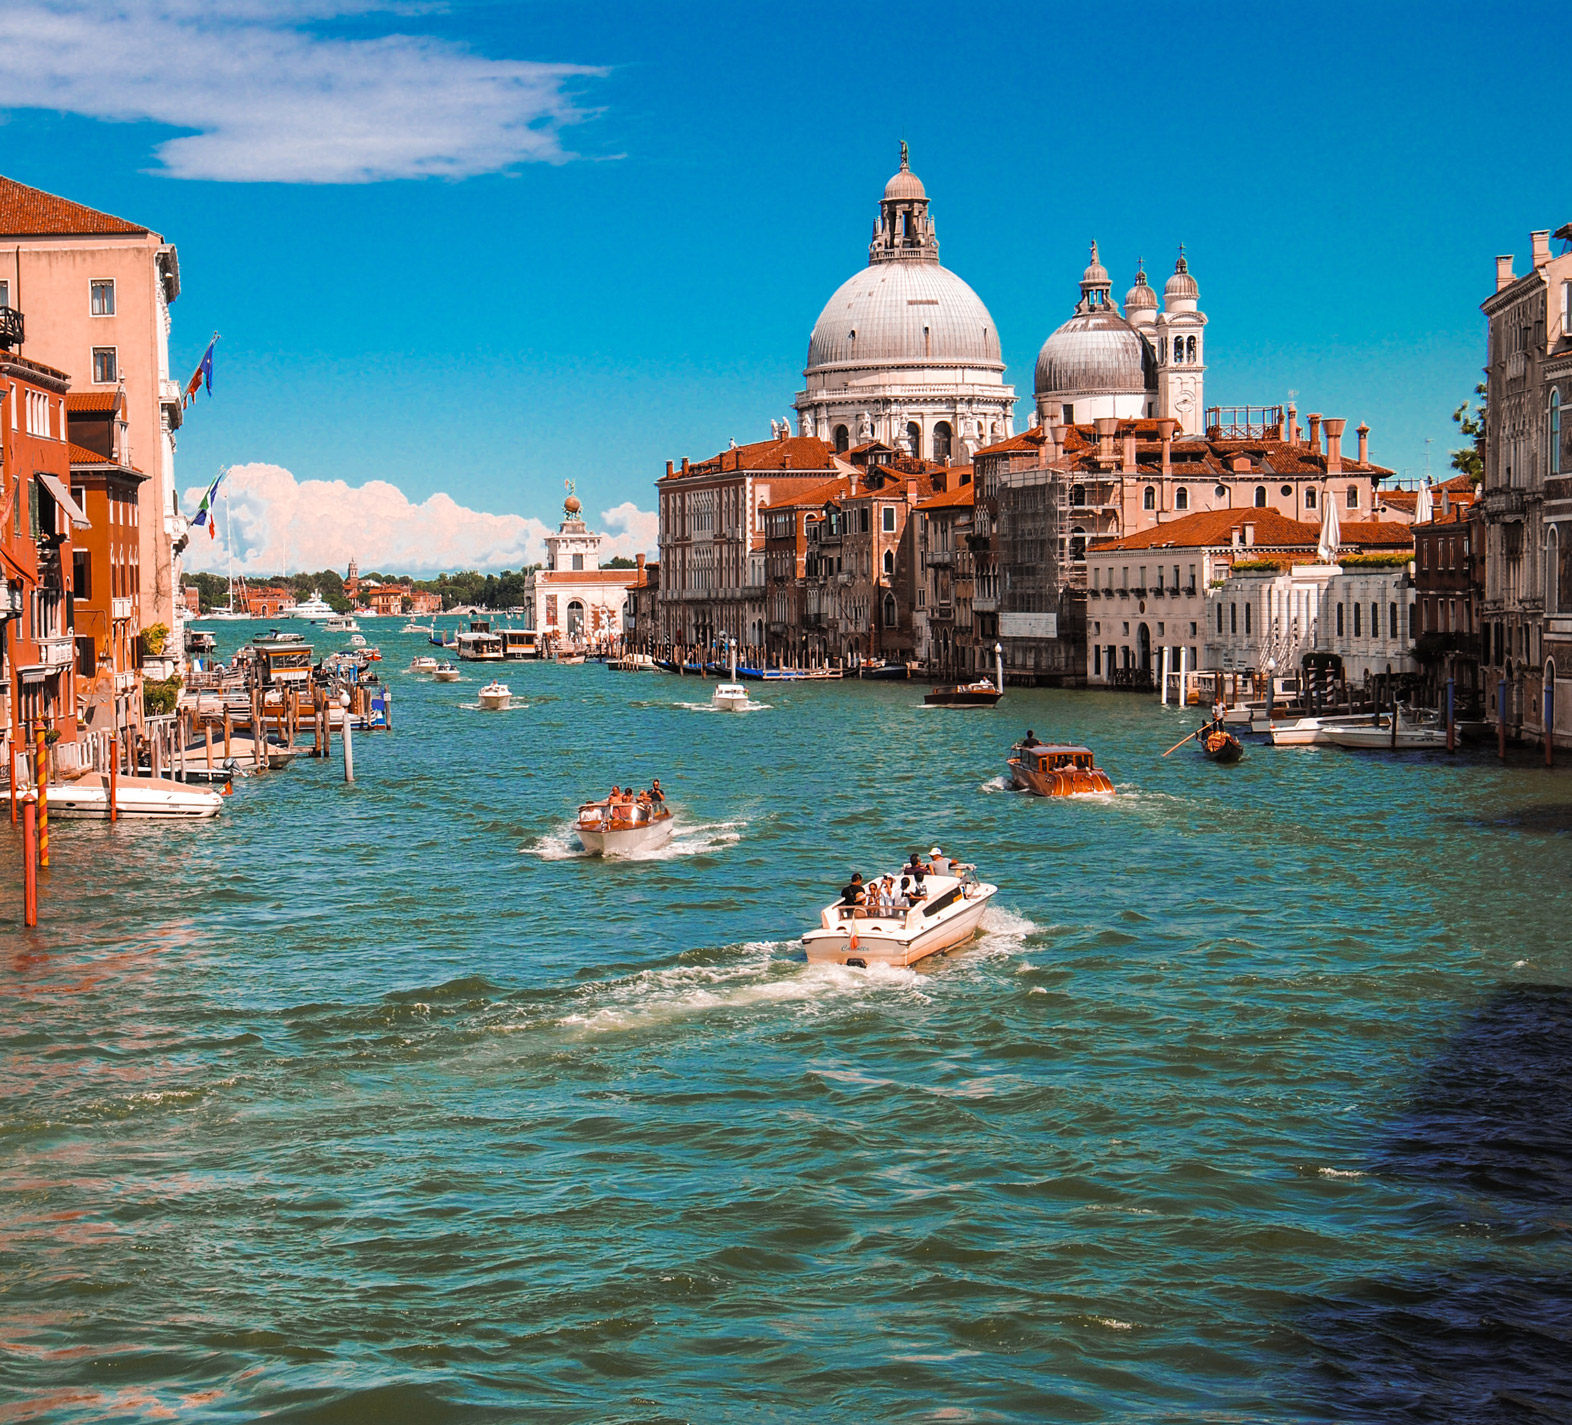 boats moving through italy on blue waters surrounded by brick colored buildings